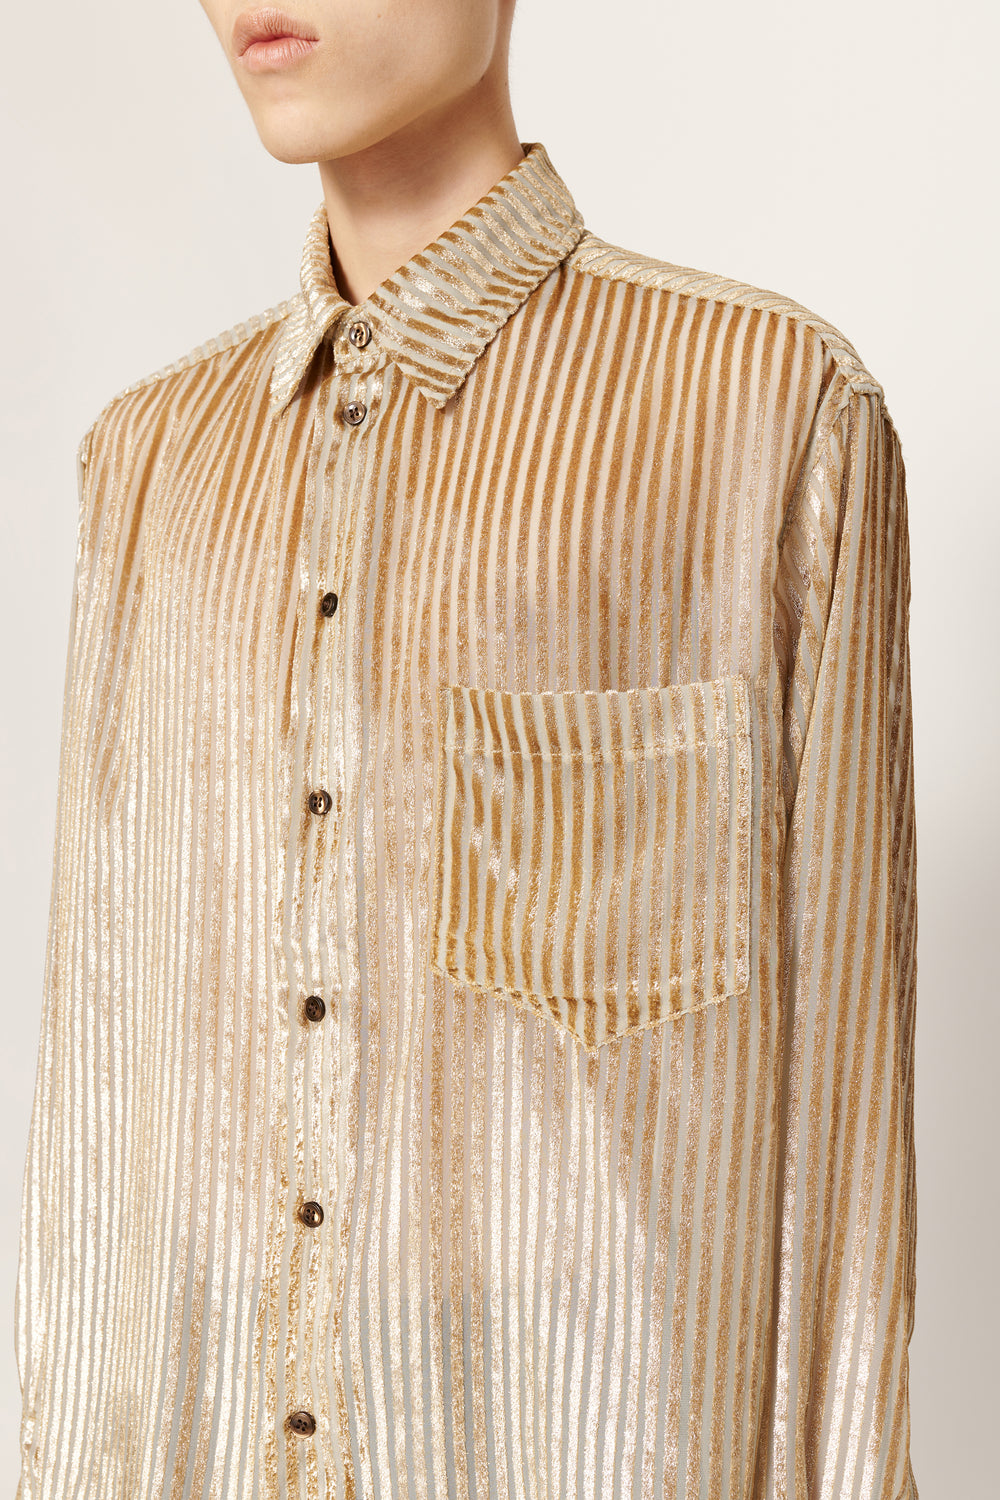 Joel Relaxed Fit Shirt Silver Stripe